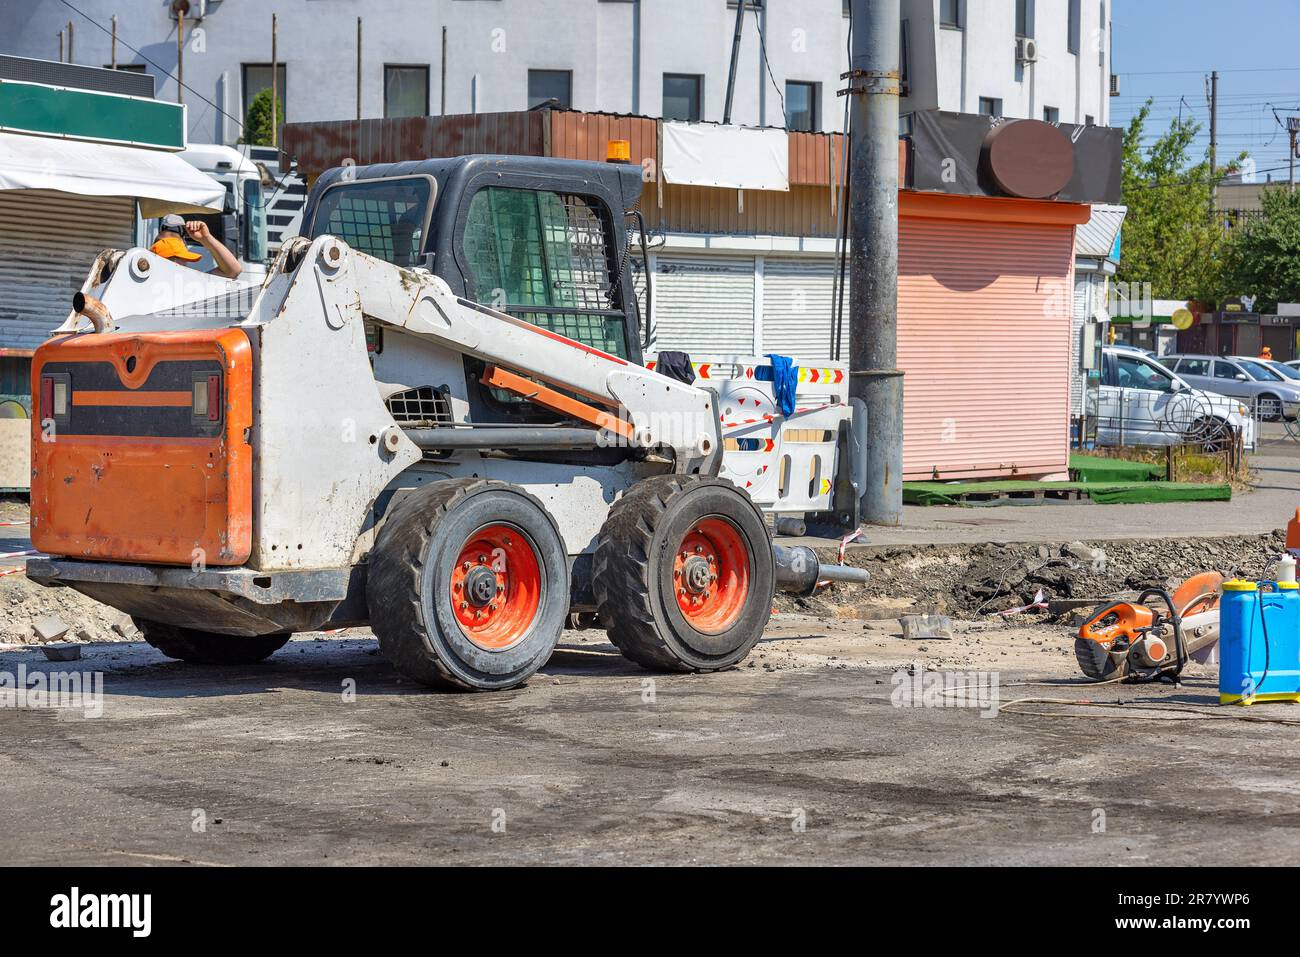 On the repaired section of the carriageway, compact and powerful construction equipment is parked along with a petrole cutter. Copy space. Stock Photo